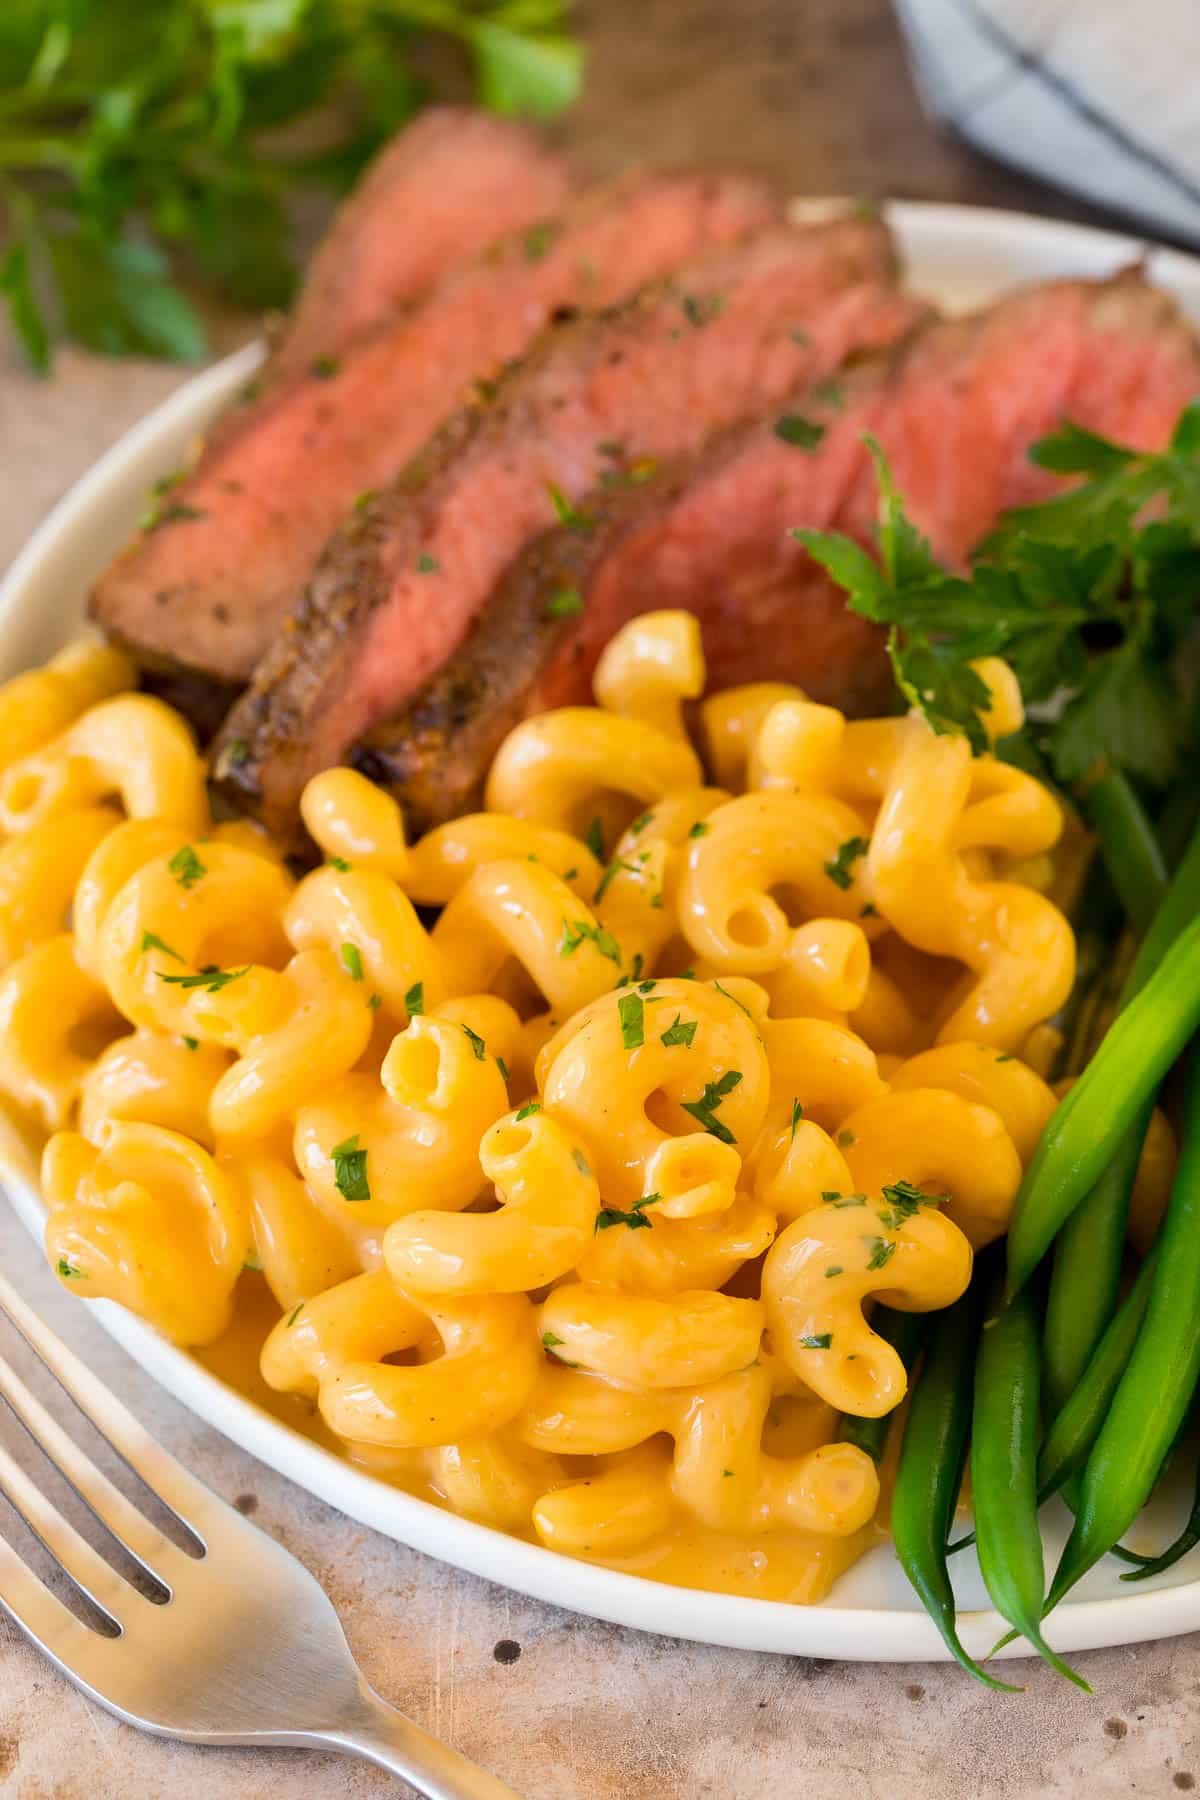 Slow cooker mac and cheese on a plate with sliced steak and vegetables.